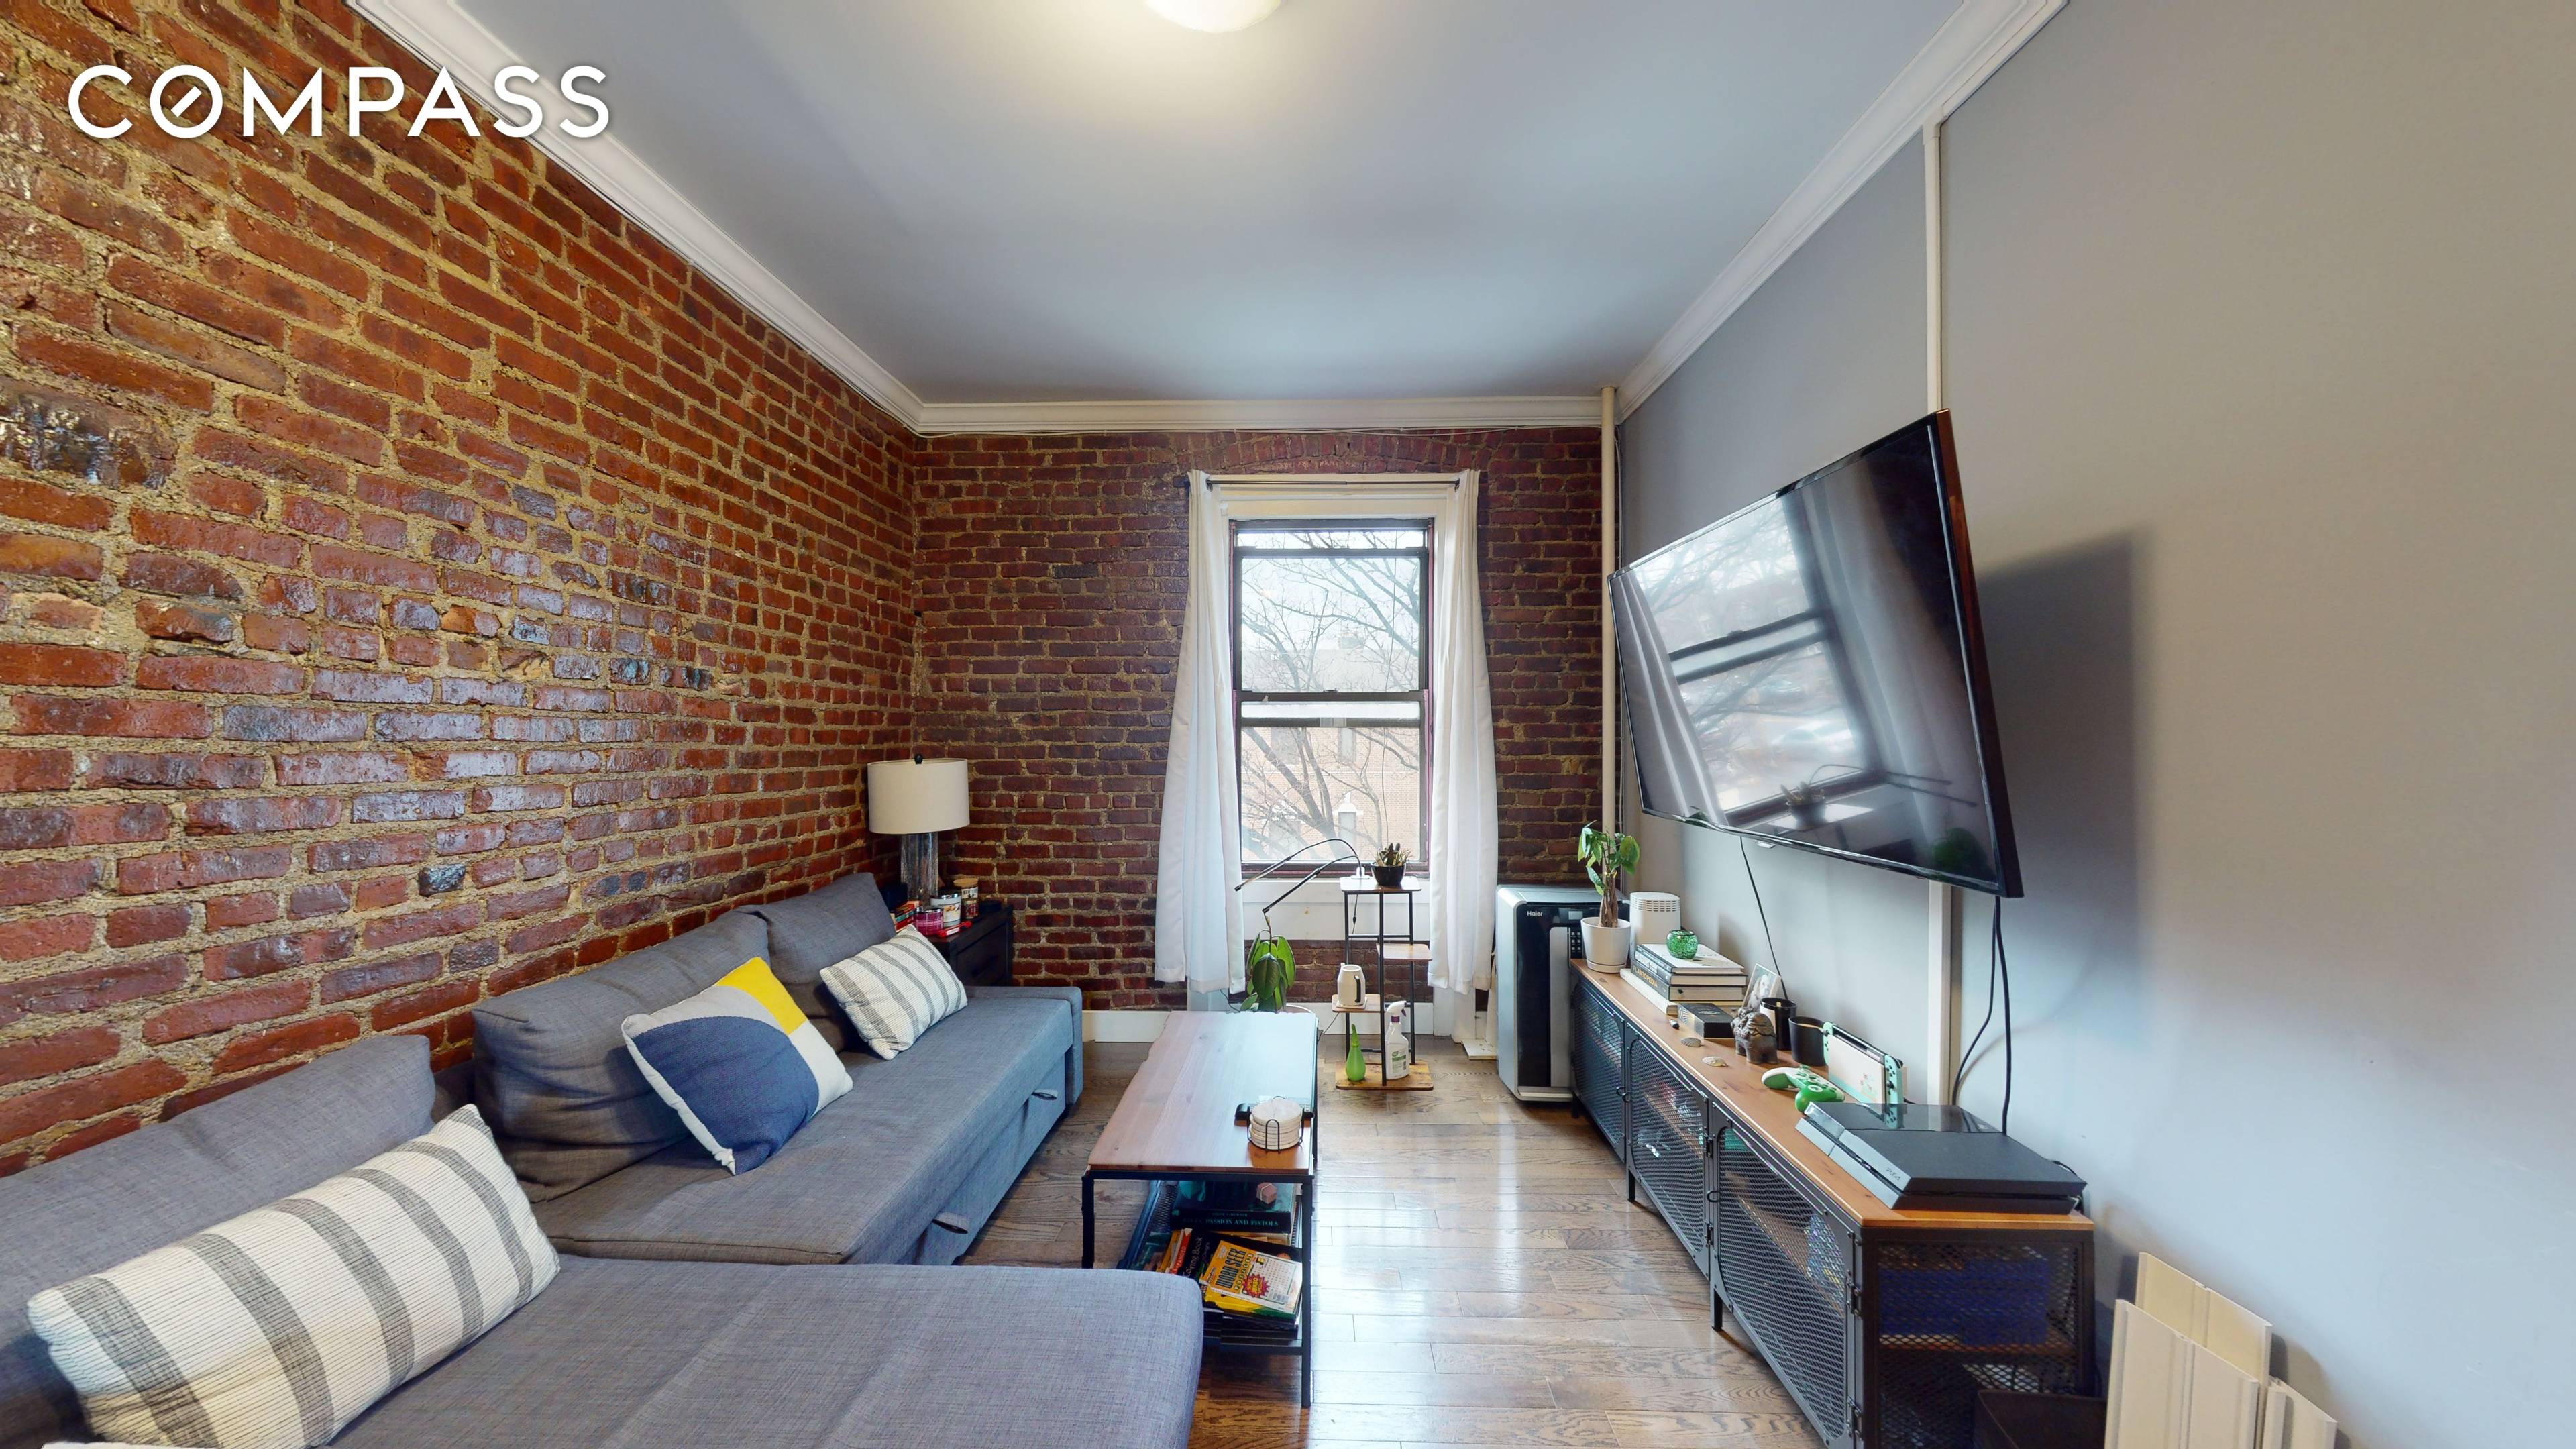 The newly renovated apartment has a high end kitchen with stainless steel appliances and bath finishes with exposed brick.